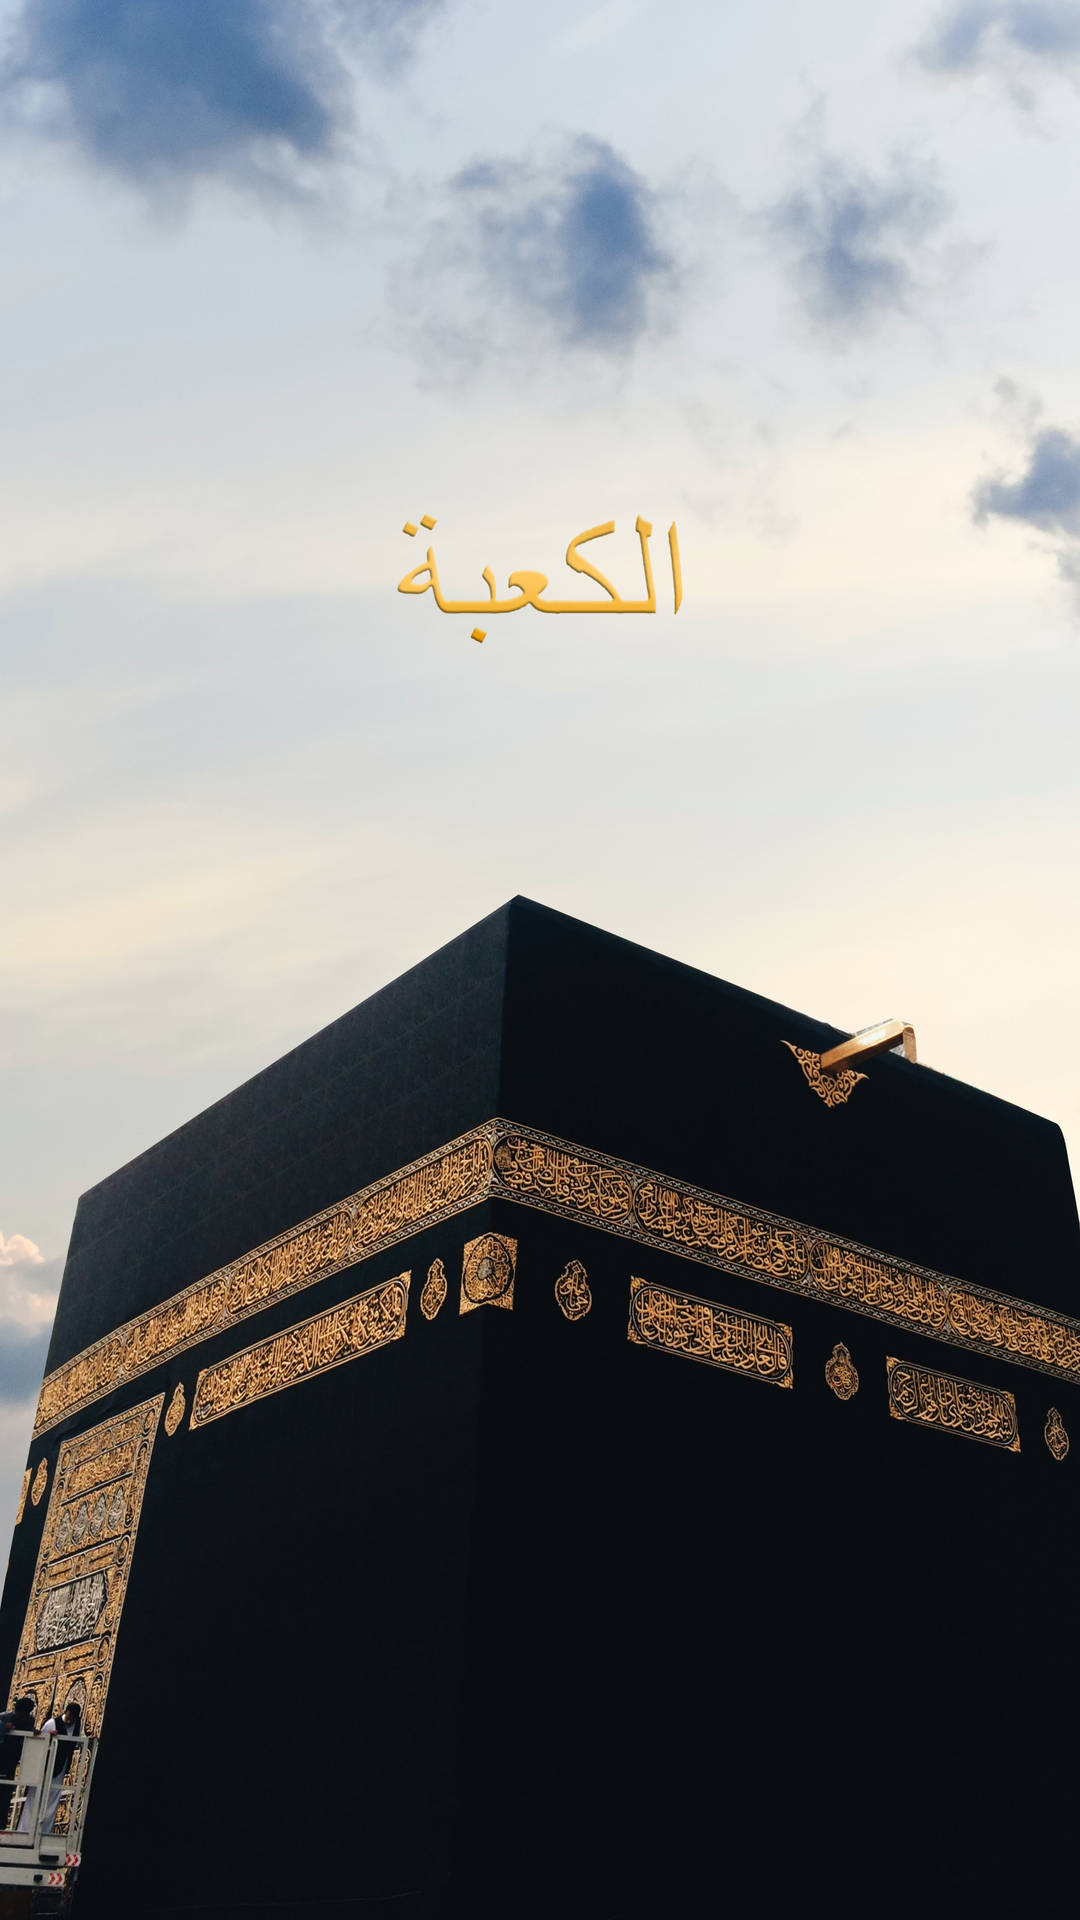 Caption: Majestic View Of The Kaaba With Golden Arabic Inscriptions